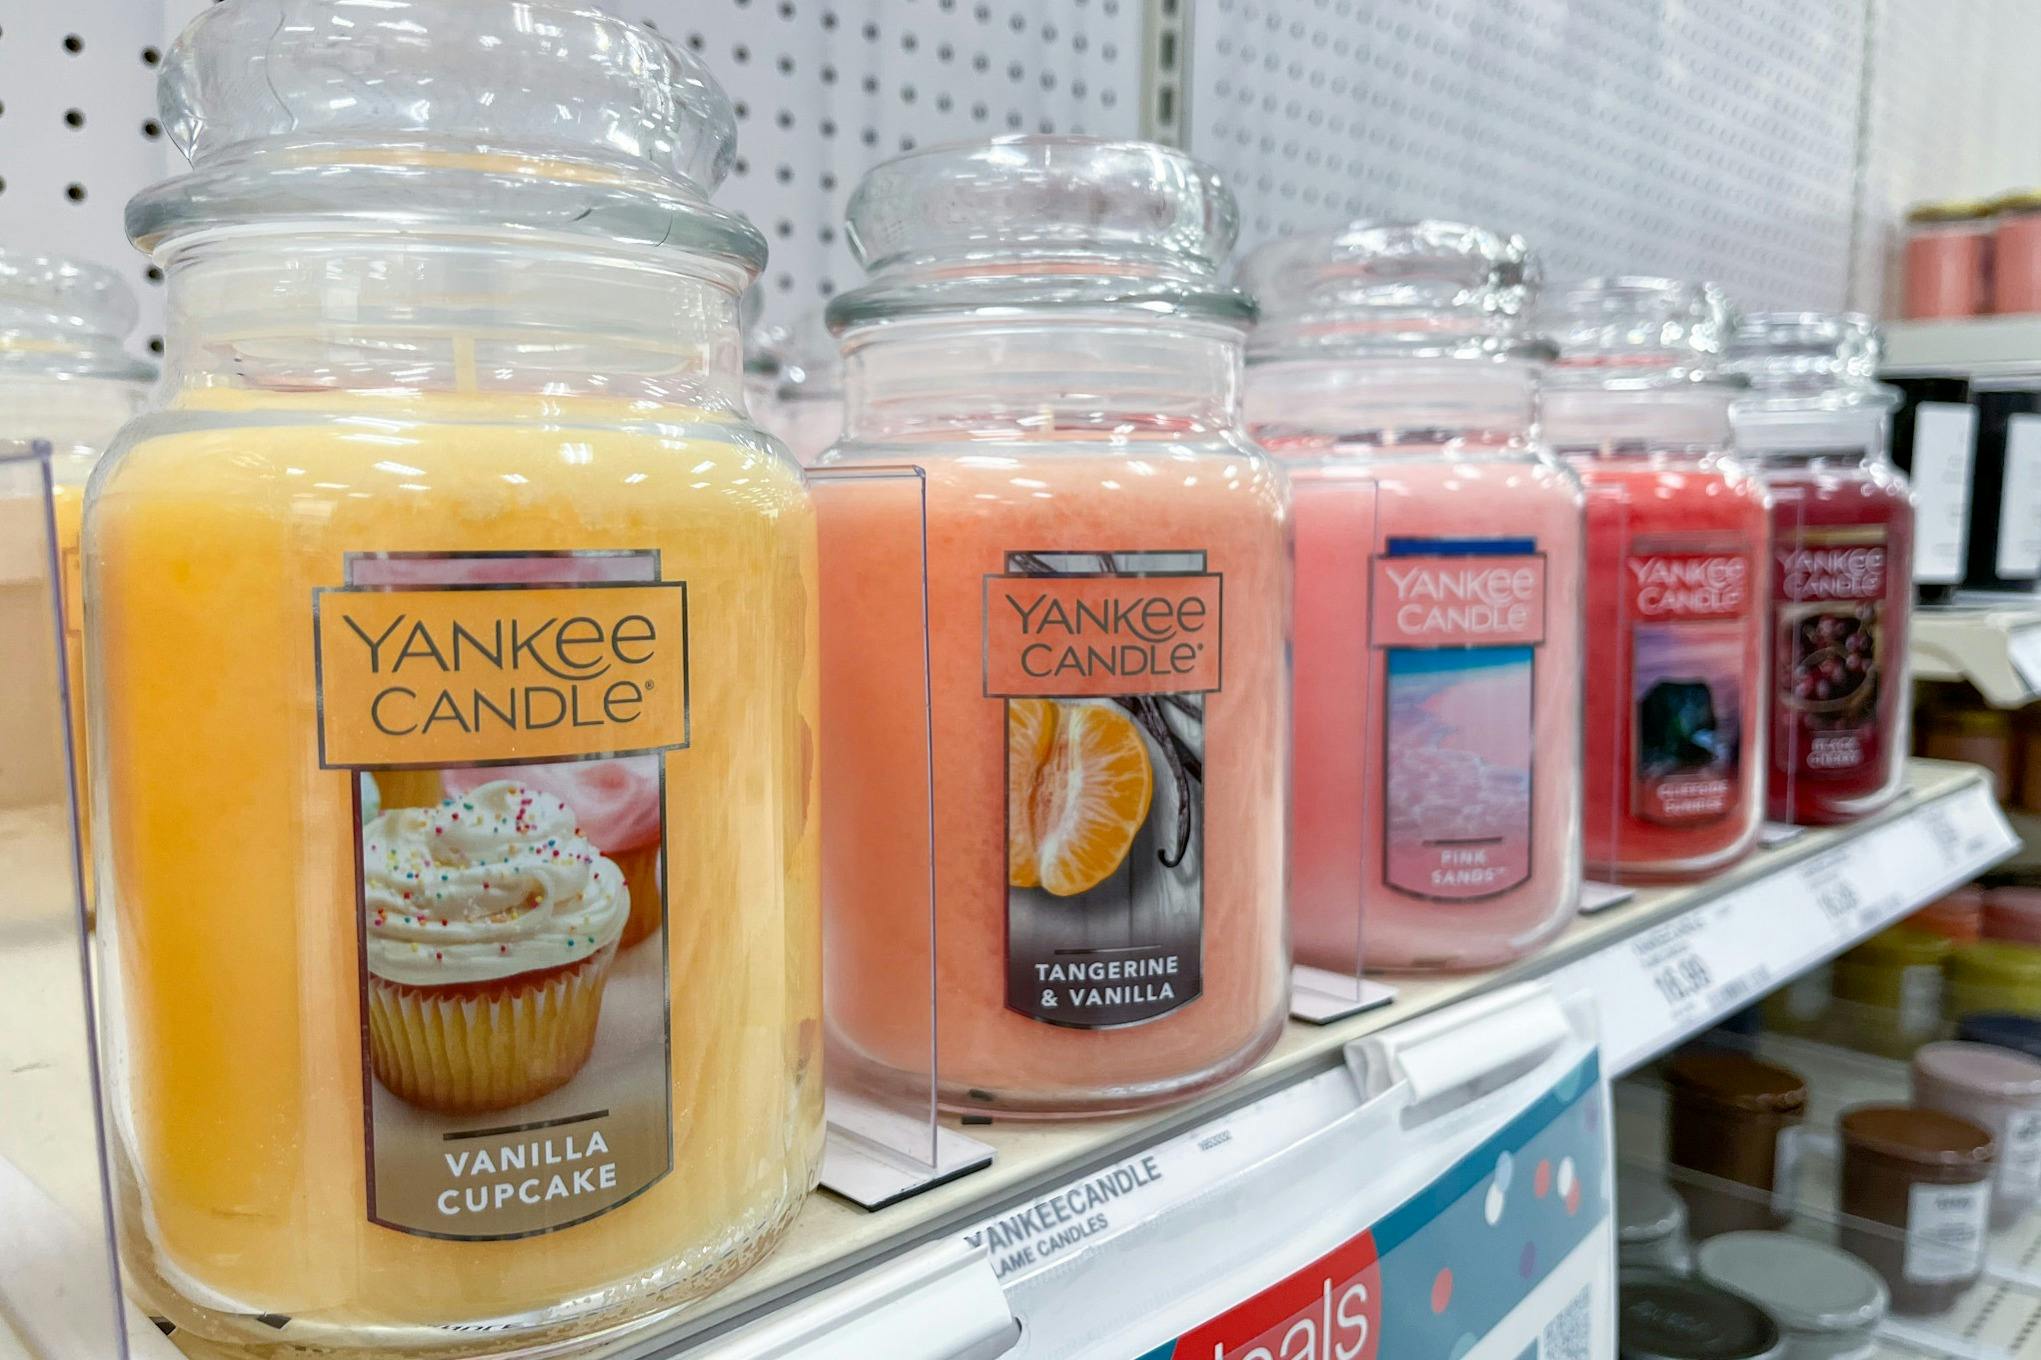 Yankee Candle Large Jar Candles, Only $8.98 at Target - The Krazy ...